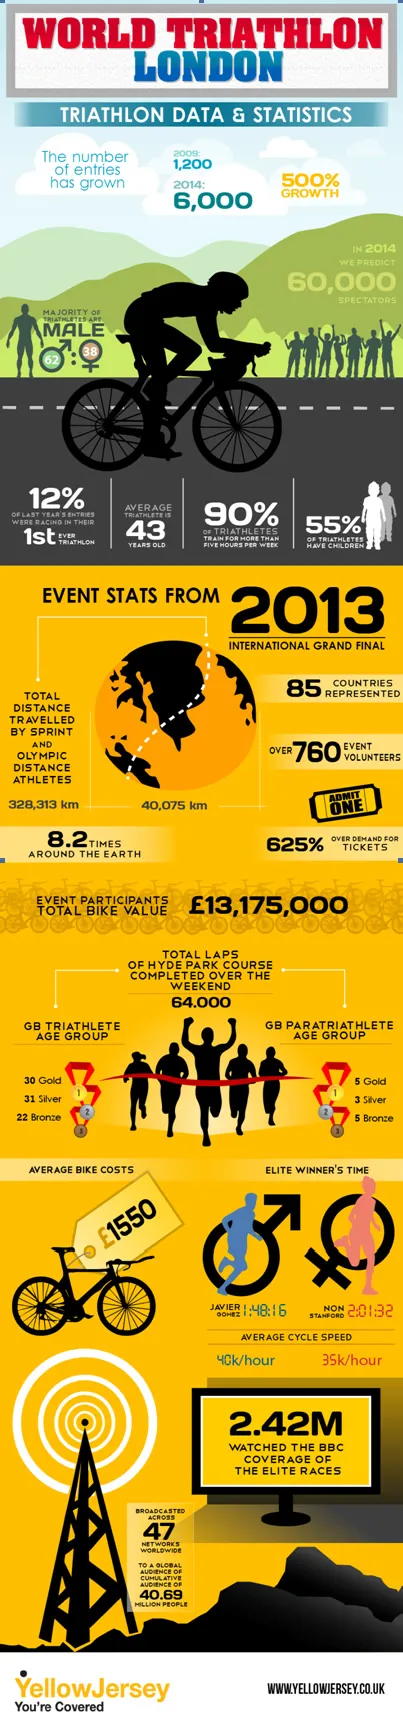 WTS London infographic